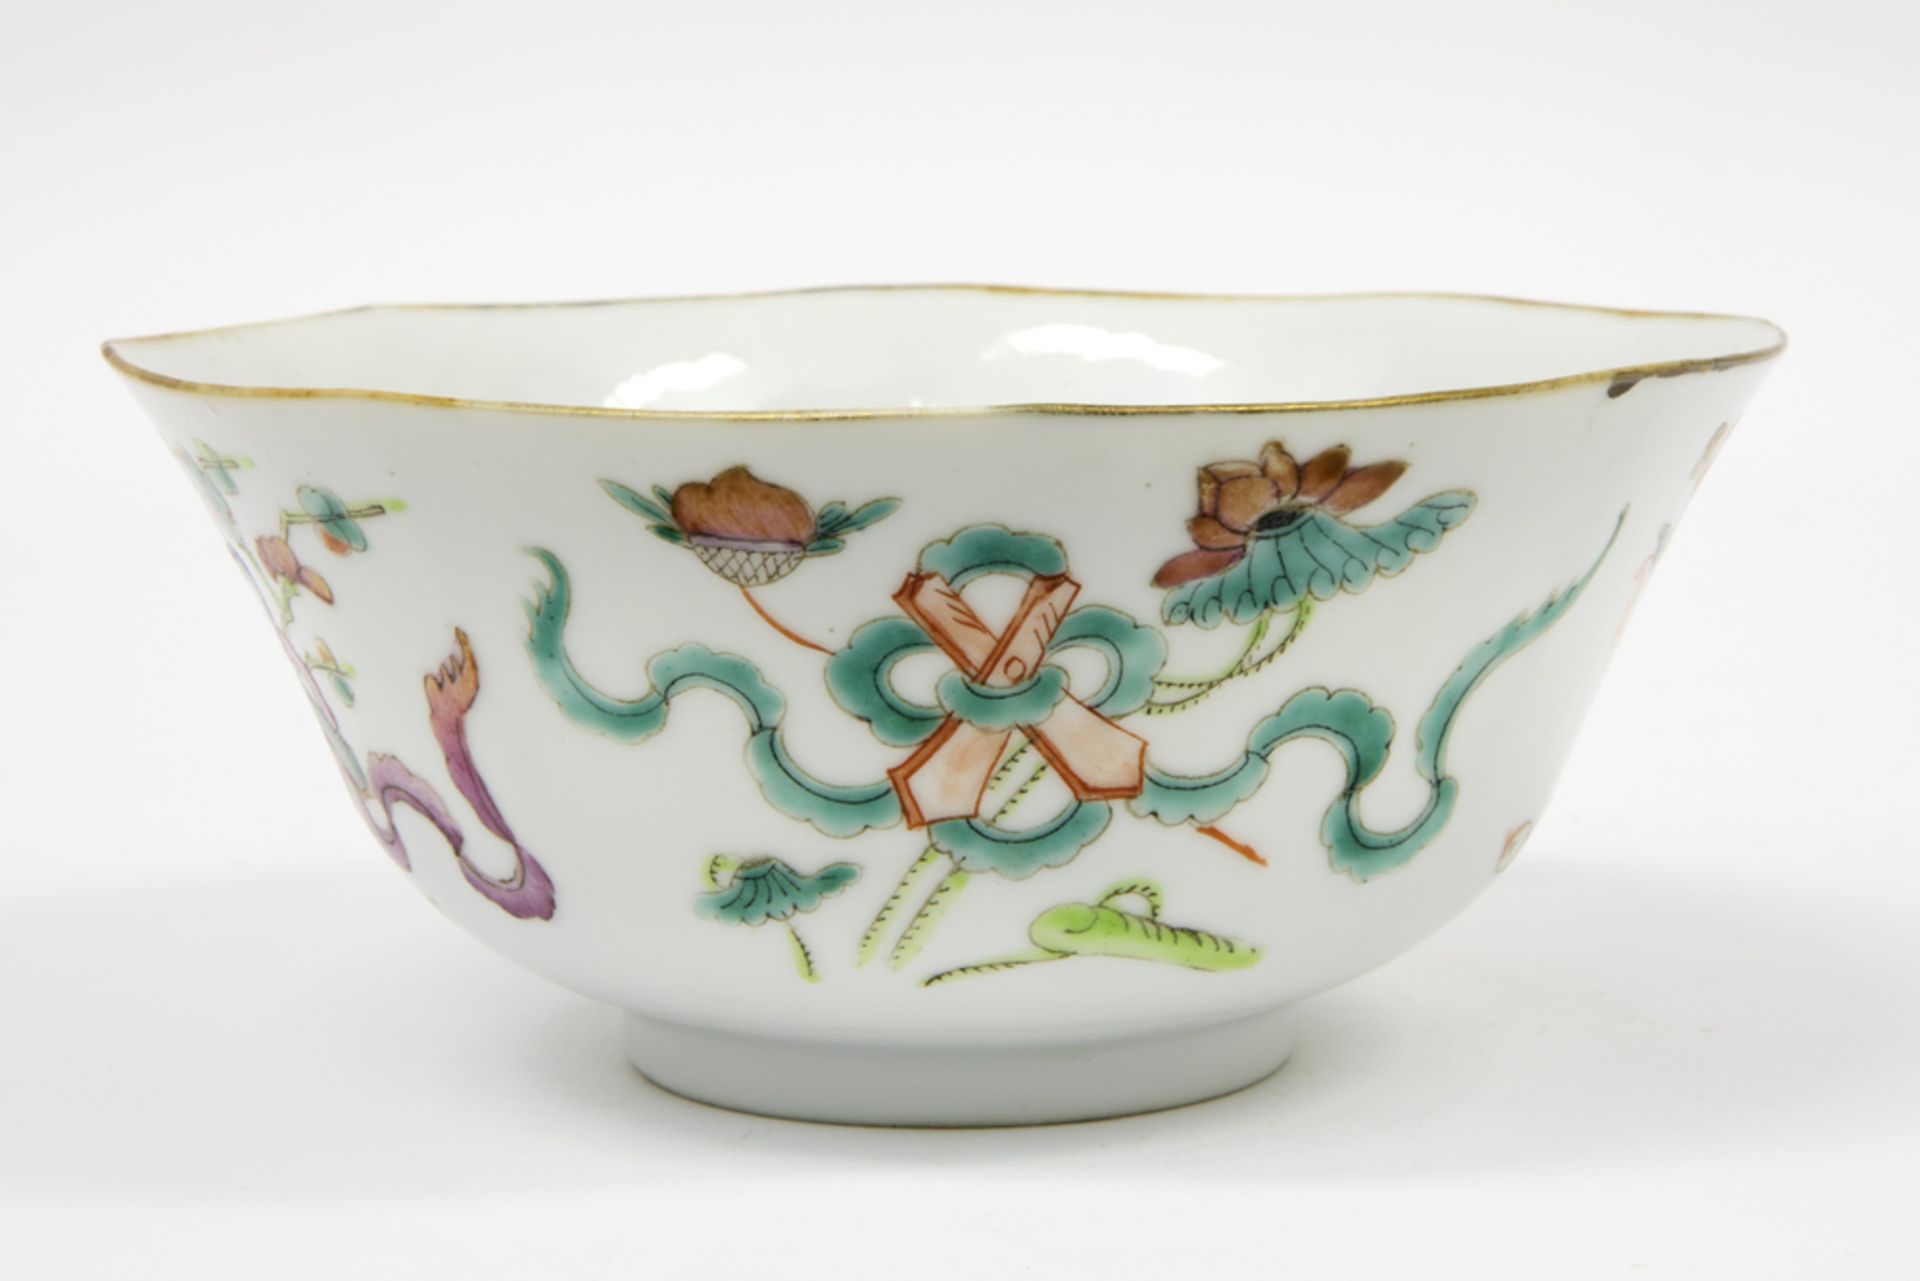 19th Cent. Chinese bowl in Hsien Feng (Xian Feng) marked porcelain with a polychrome decor || - Image 4 of 7